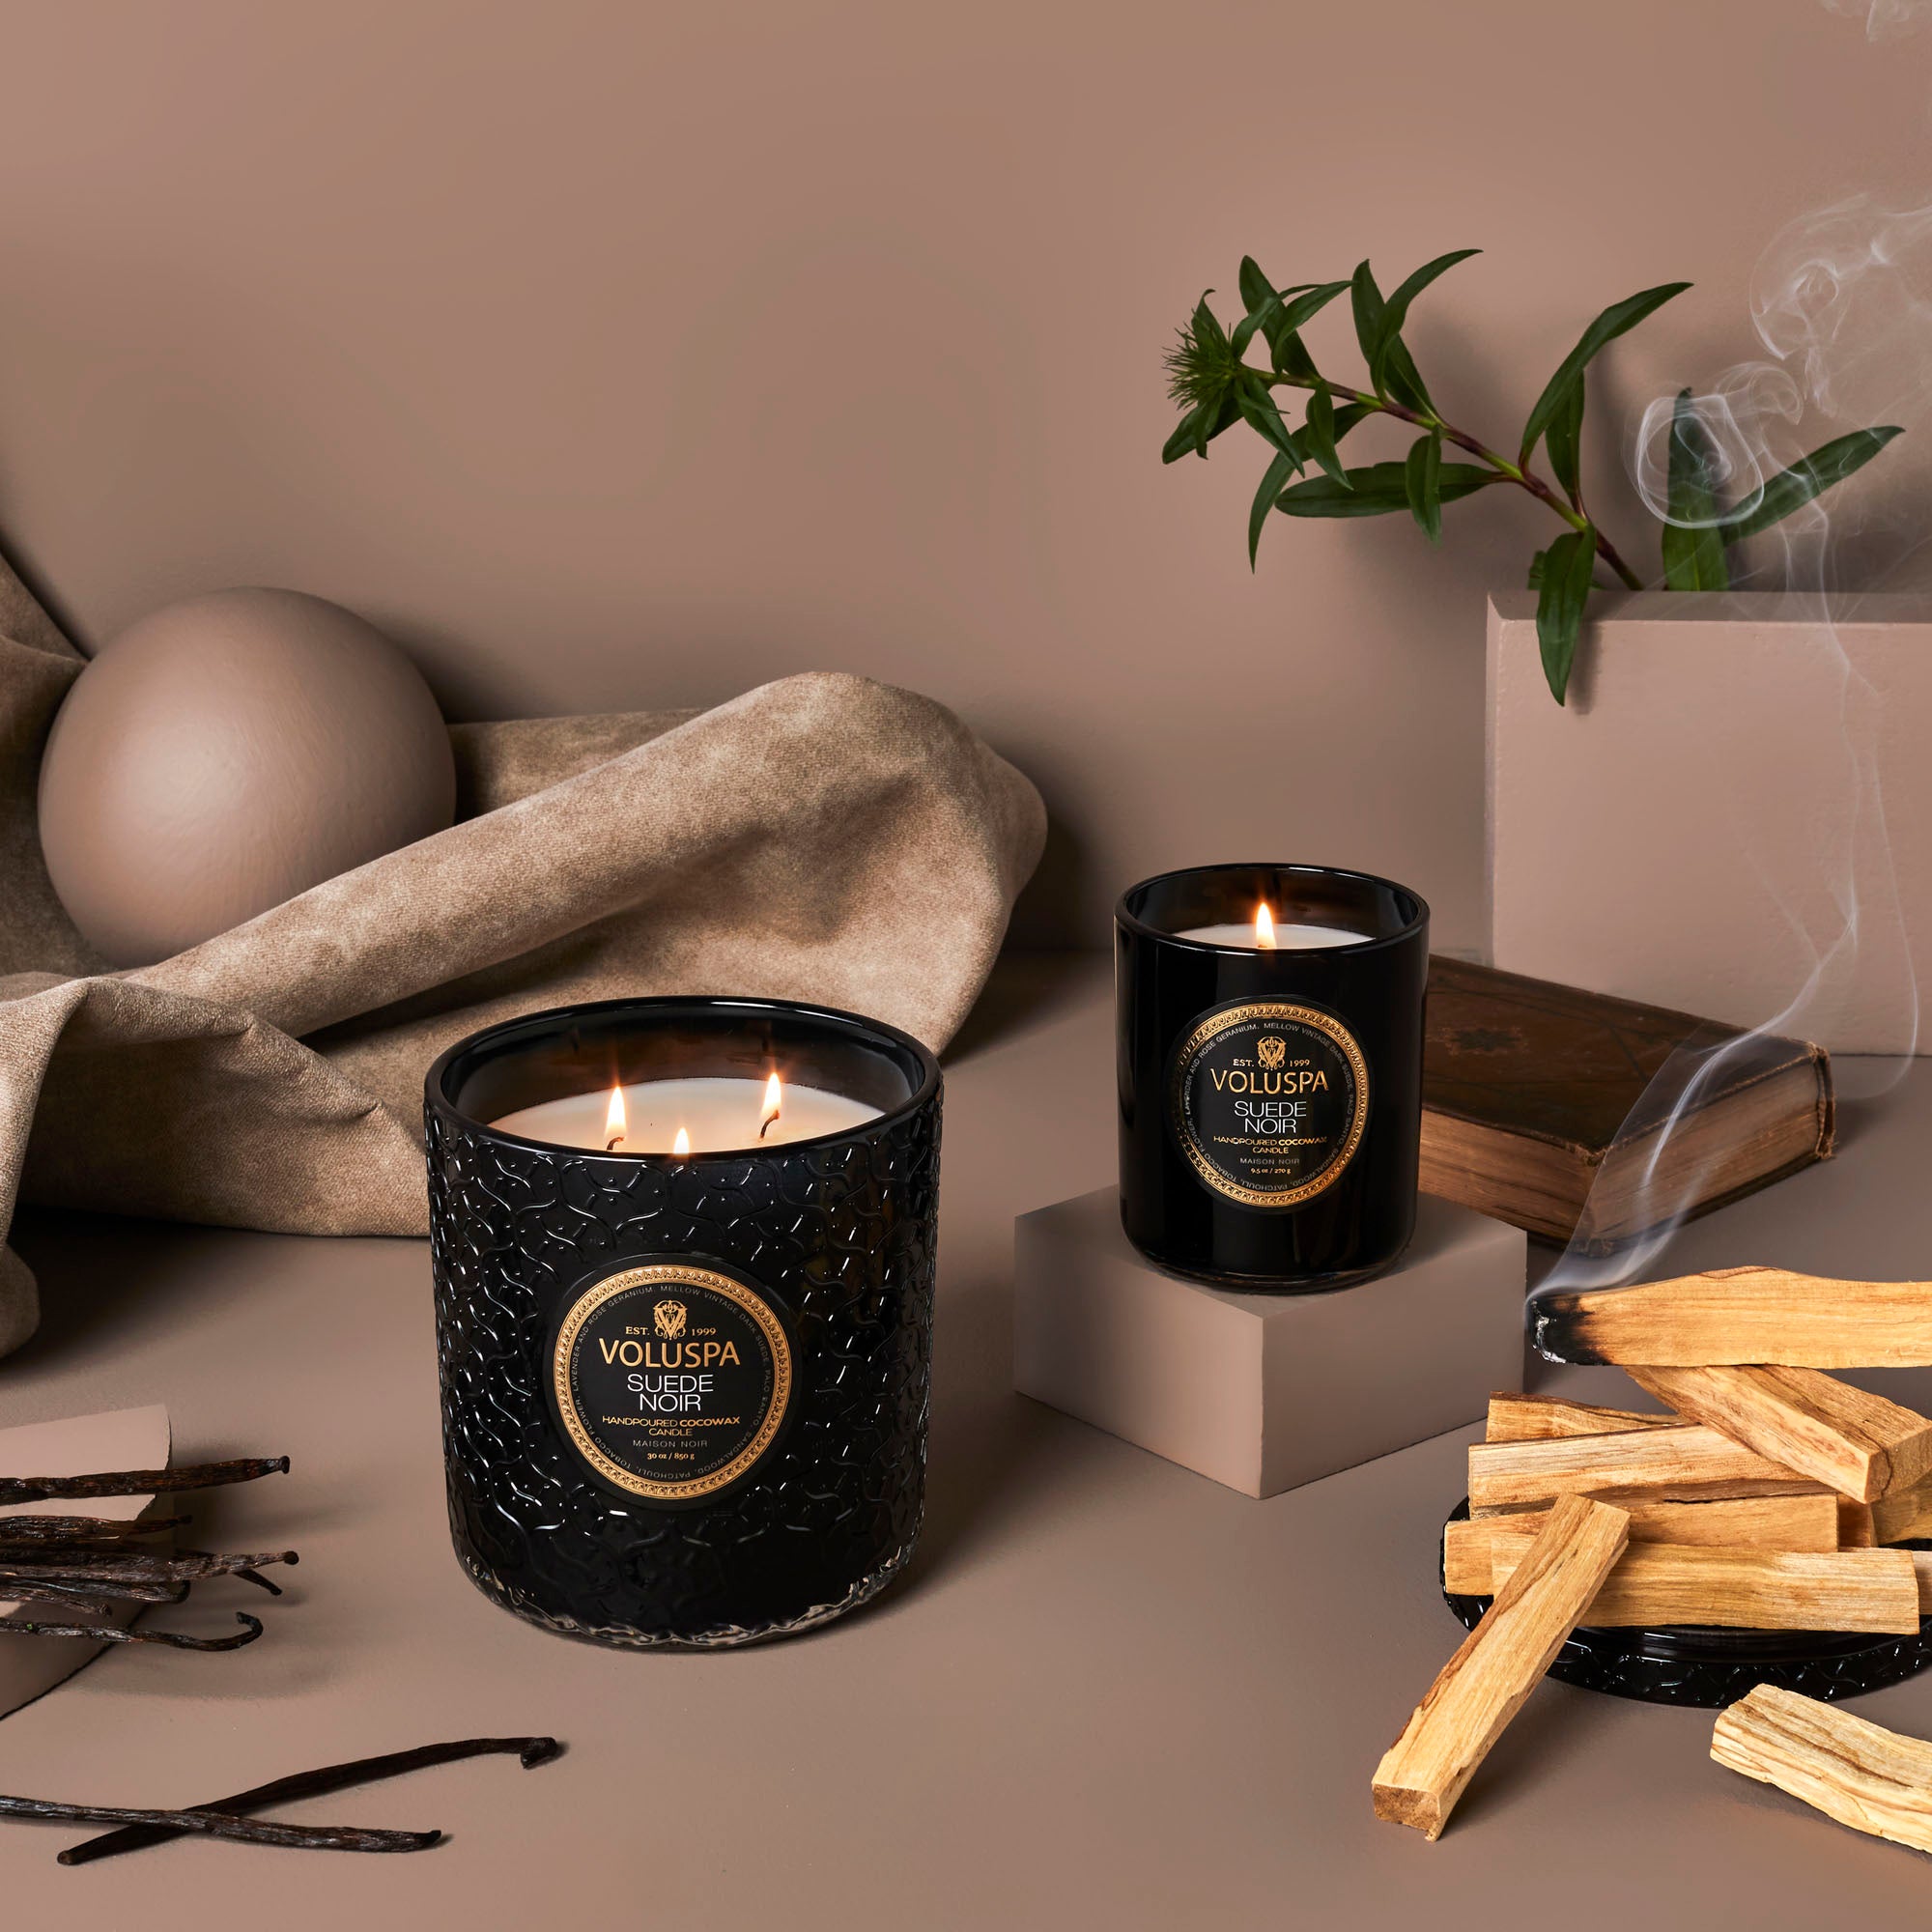 Suede Noir - Classic Candle